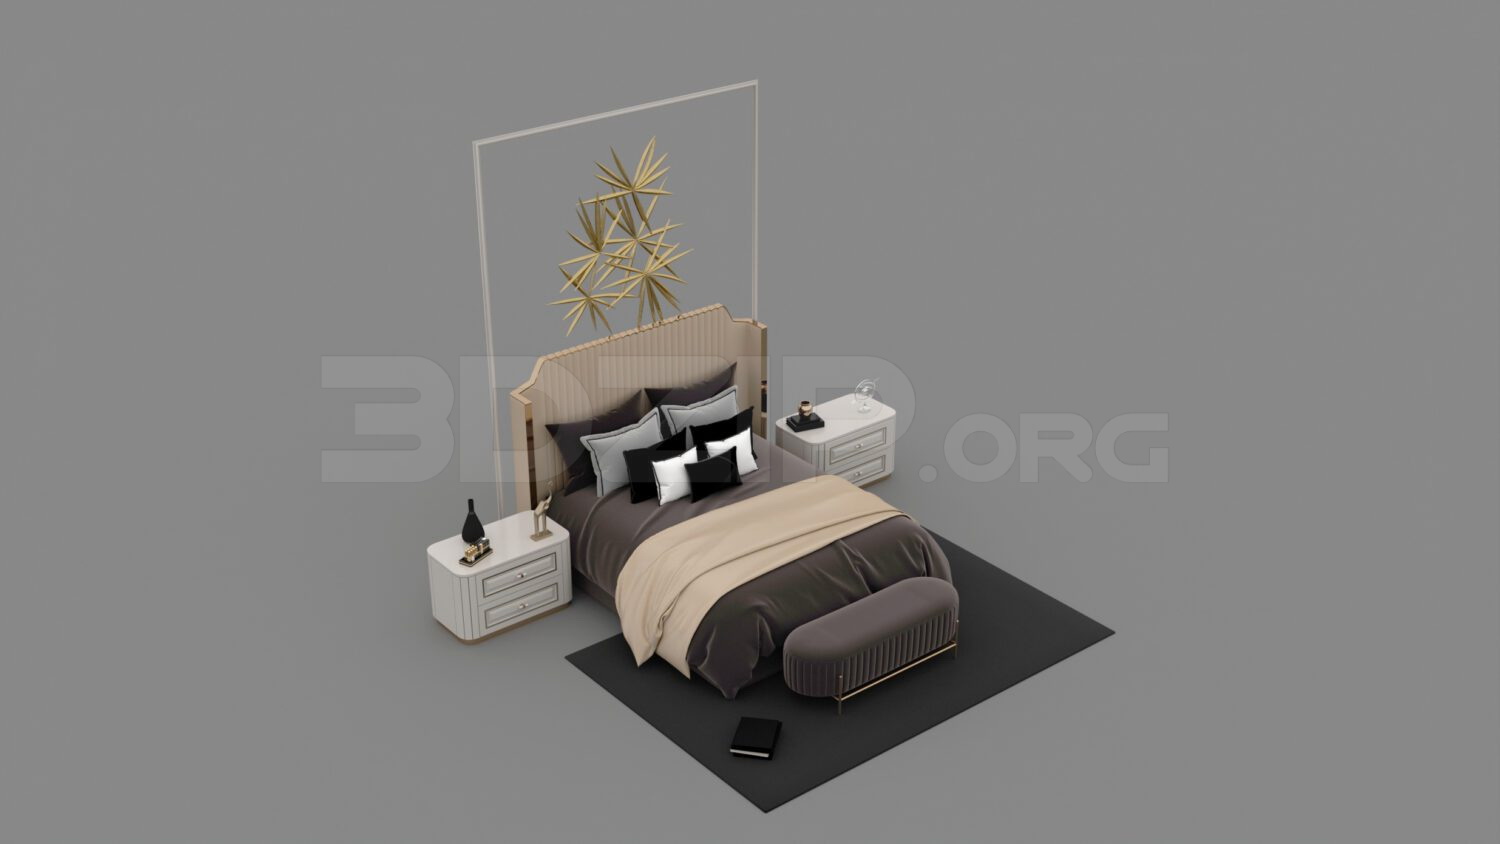 1749. Download Free Bed Model By Nguyen Hoang Minh